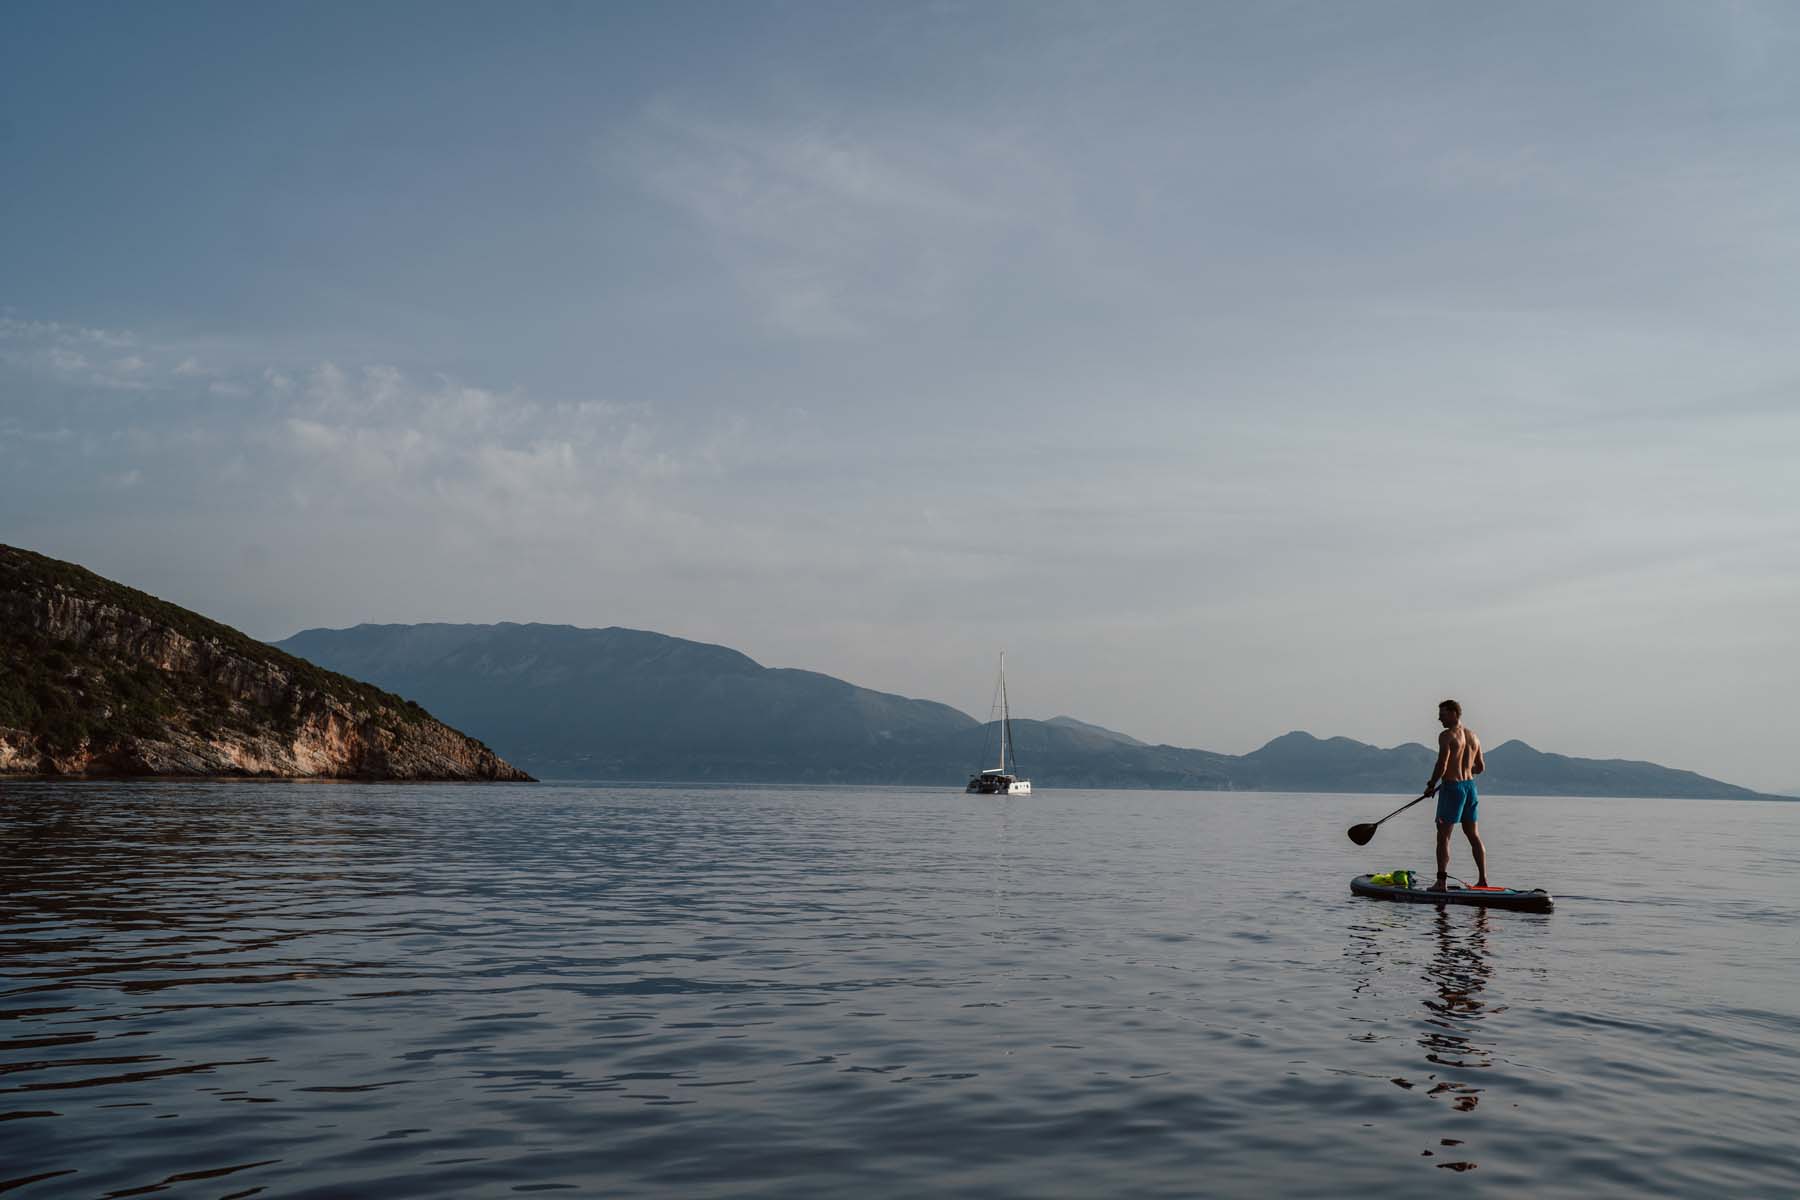 A paddleboarder on the sea with mountains in the background